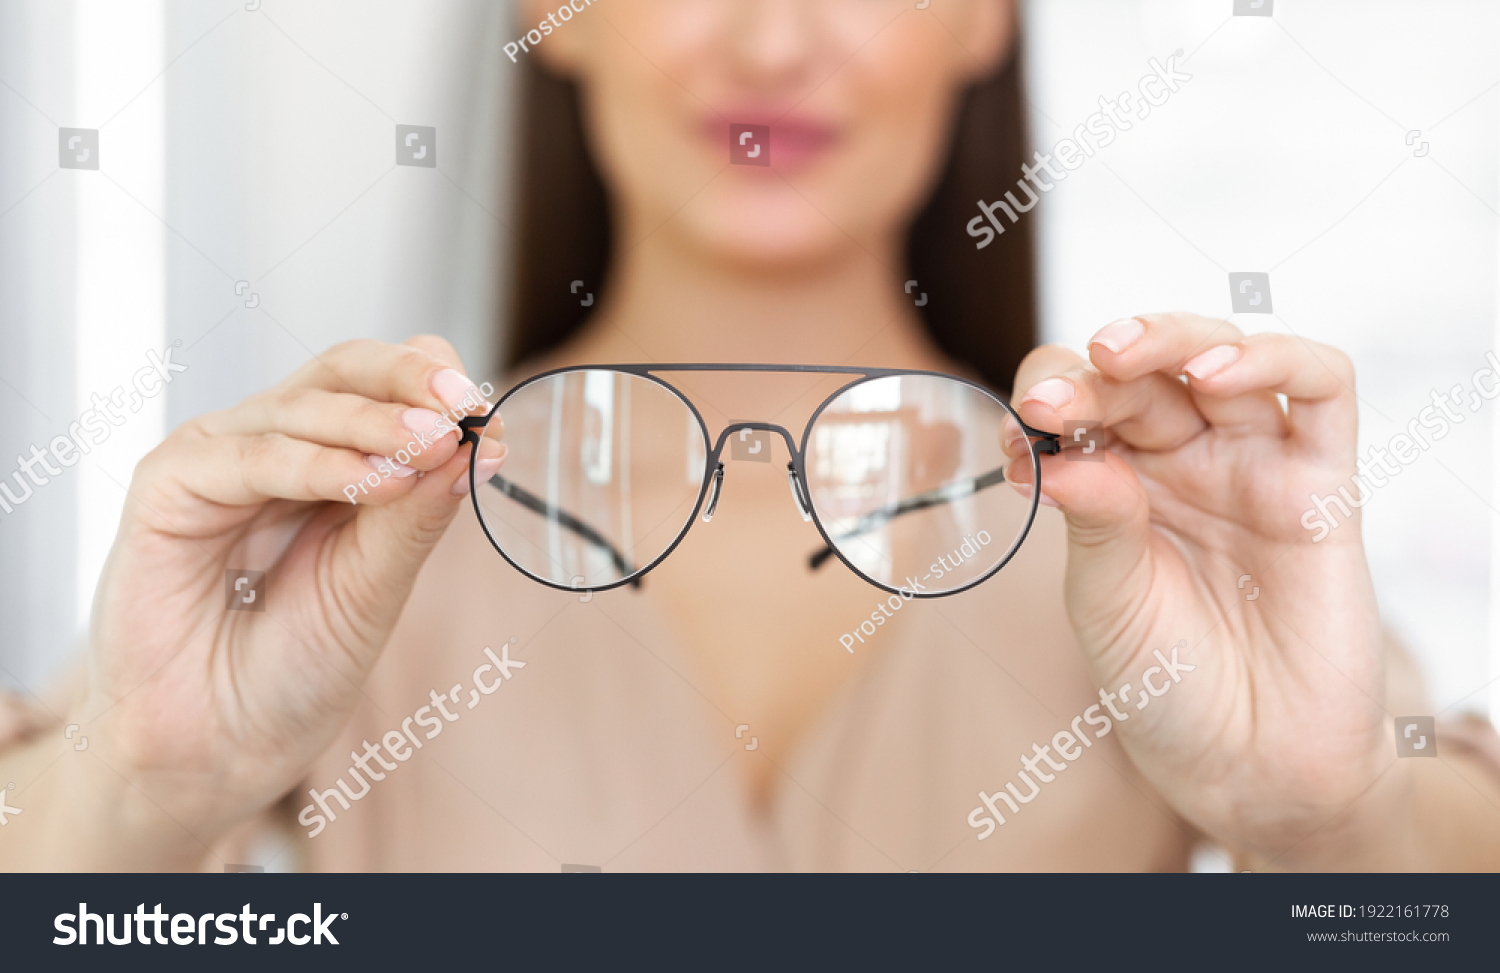 Eyesight And Vision Concept. Closeup of unrecognizable woman showing new eyeglasses to camera, standing at optics store, blurred background, selective focus on eyewear. Lady offering specs #1922161778